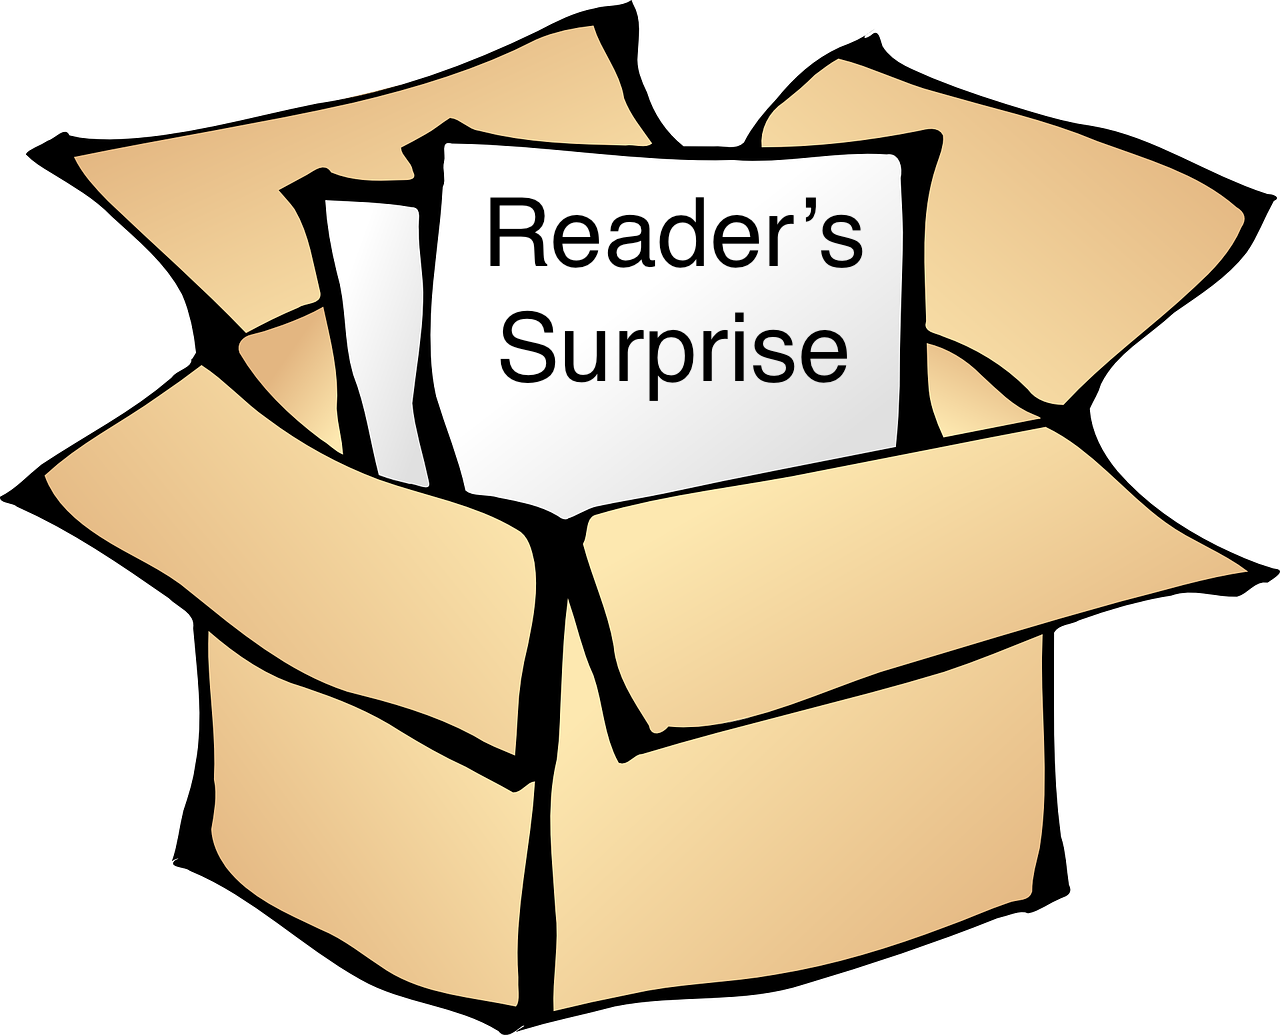 Turn Your Scene That’s Becoming a Cliché Into a Reader’s Surprise